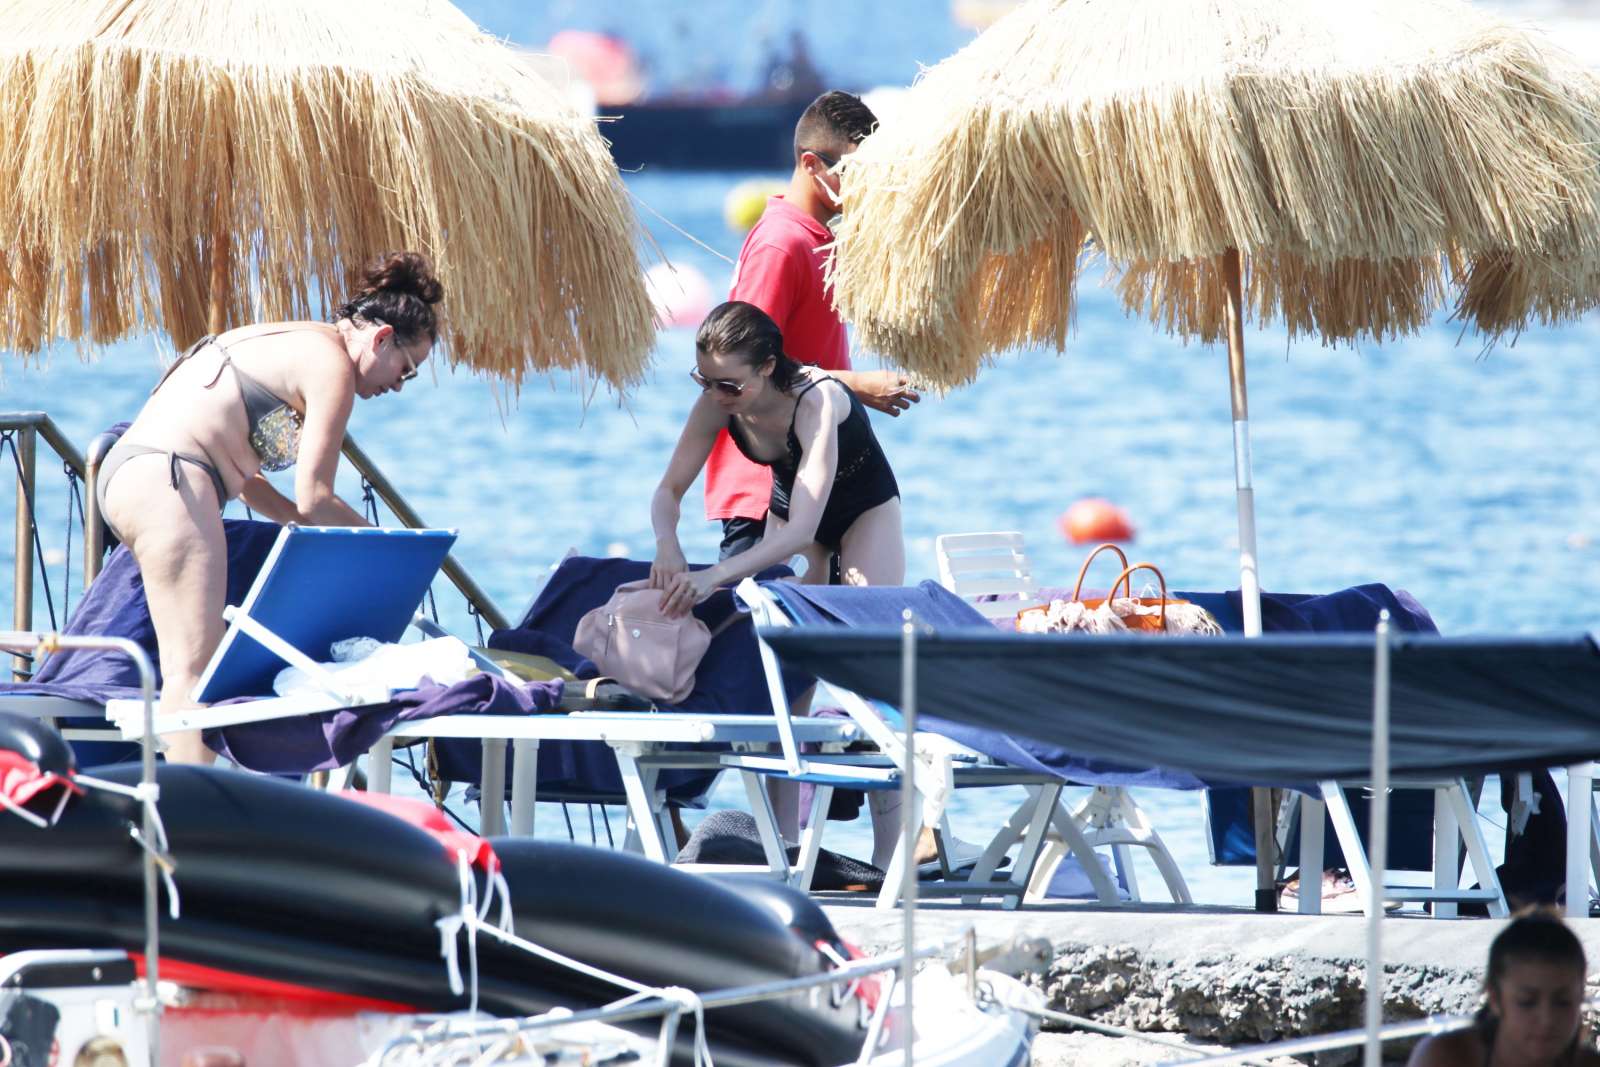 Lily Collins in Black Swimsuit at a beach in Ischia. 